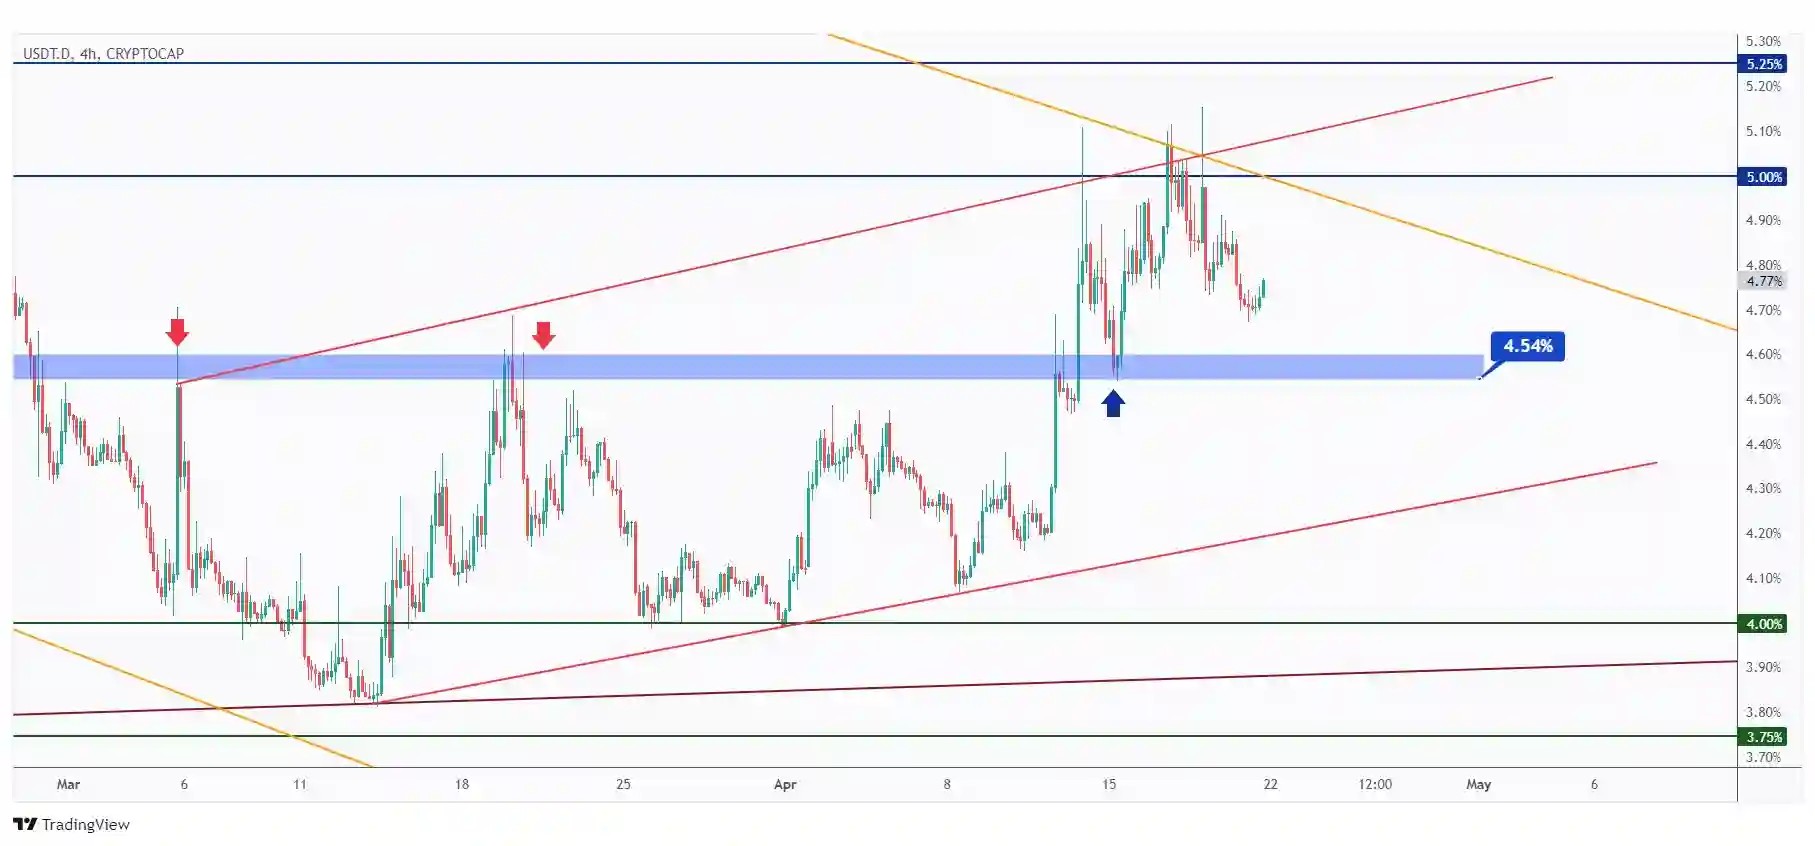 USDT.D 4h chart showing the last low at 4.54% that we need a break below for the bears to take over.